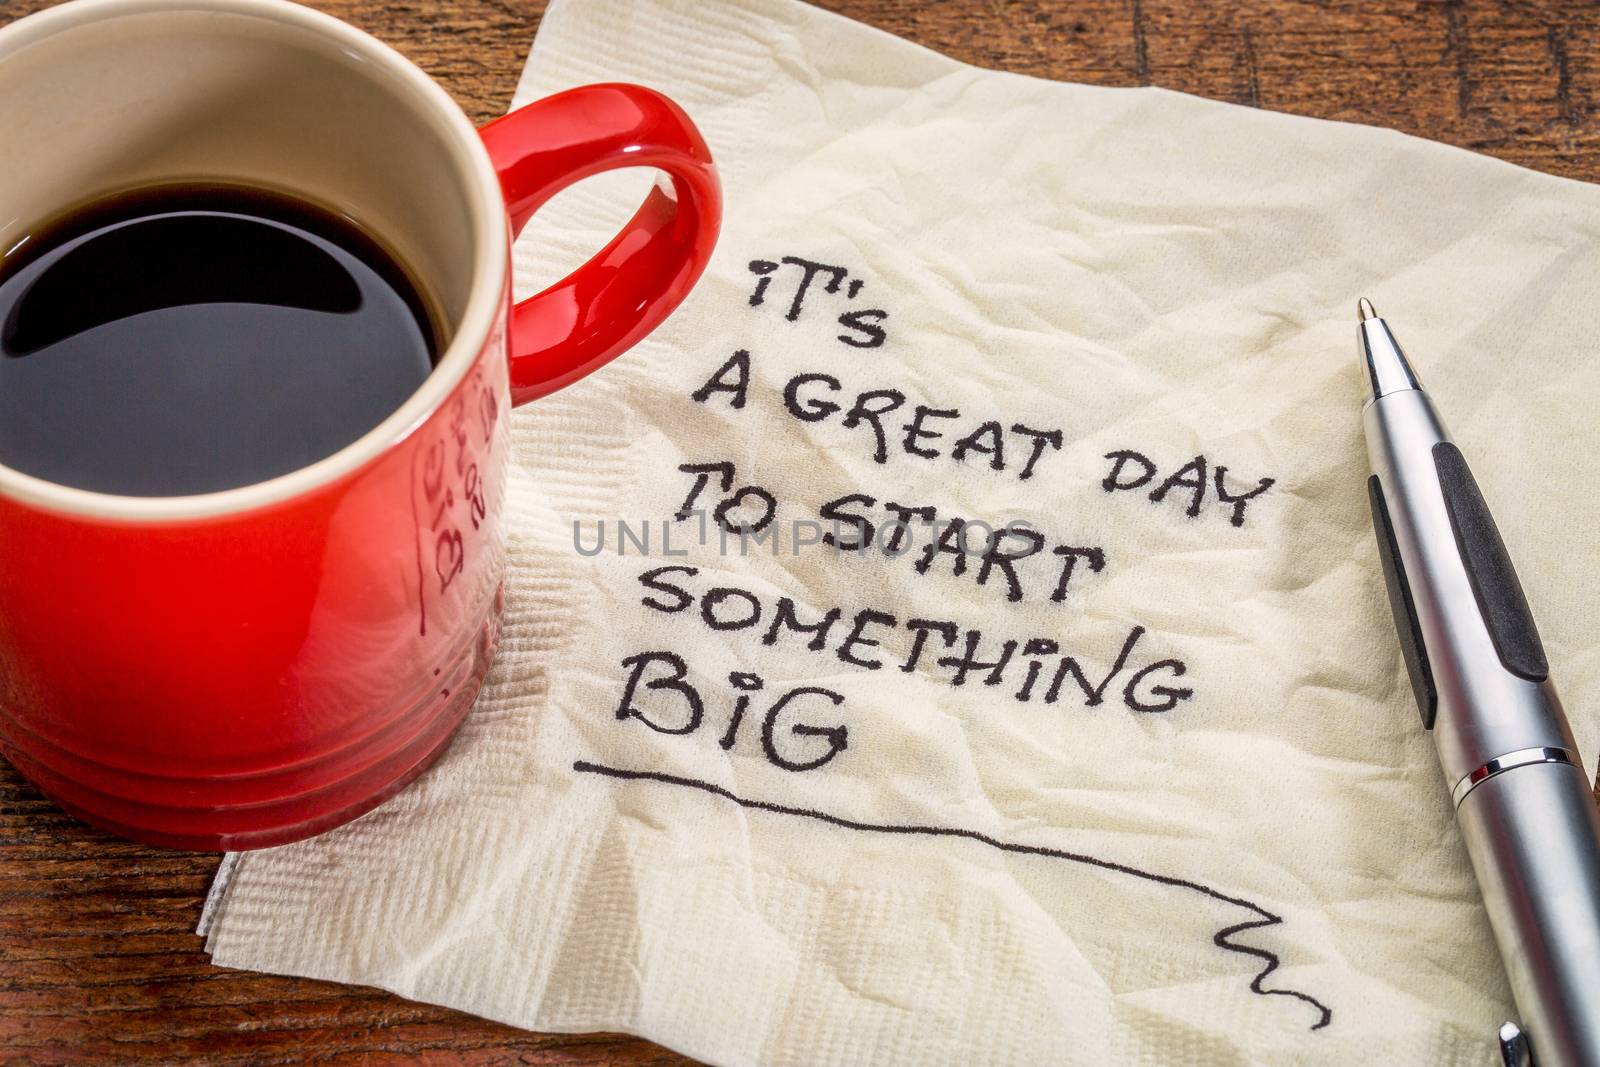 It is a great day to start something big by PixelsAway